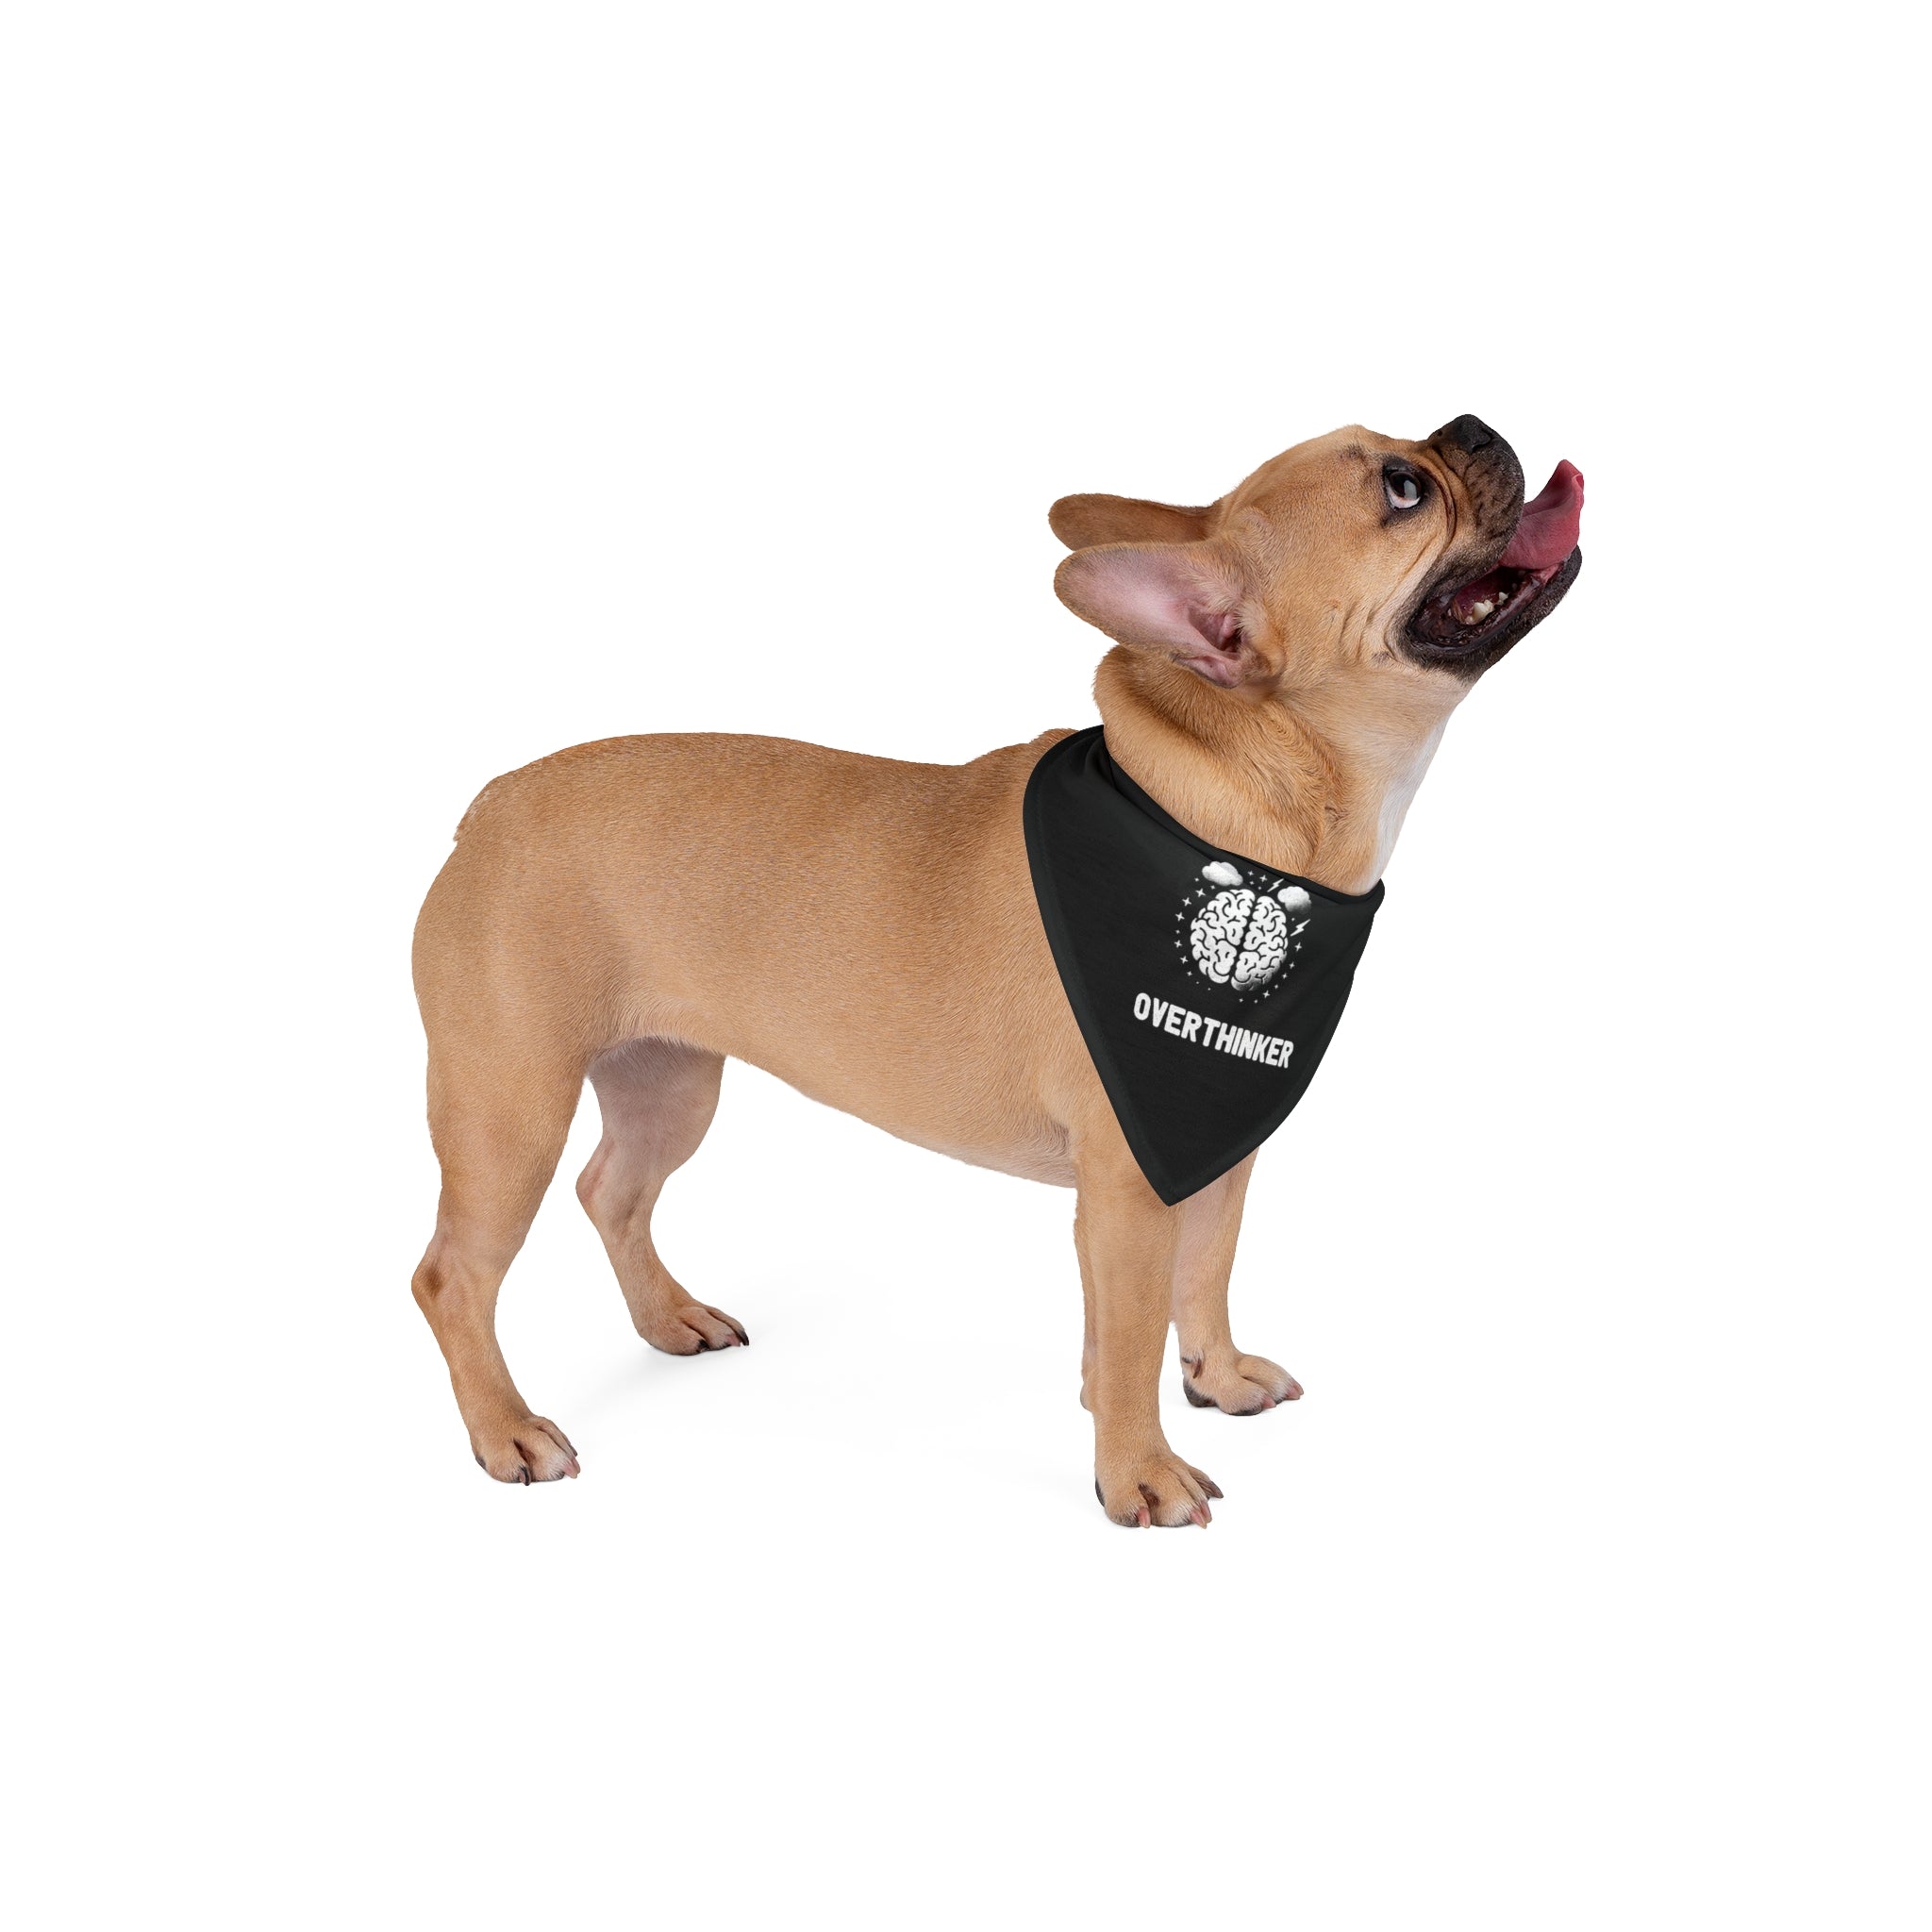 A small brown dog with a black pet bandana that features the words "OVERTHINKER" and a brain graphic. This Professional Overthinker - Pet Bandana design is perfect for pets who ponder, made from soft-spun polyester for ultimate comfort. The dog looks up with its tongue out, showcasing its quirky charm.